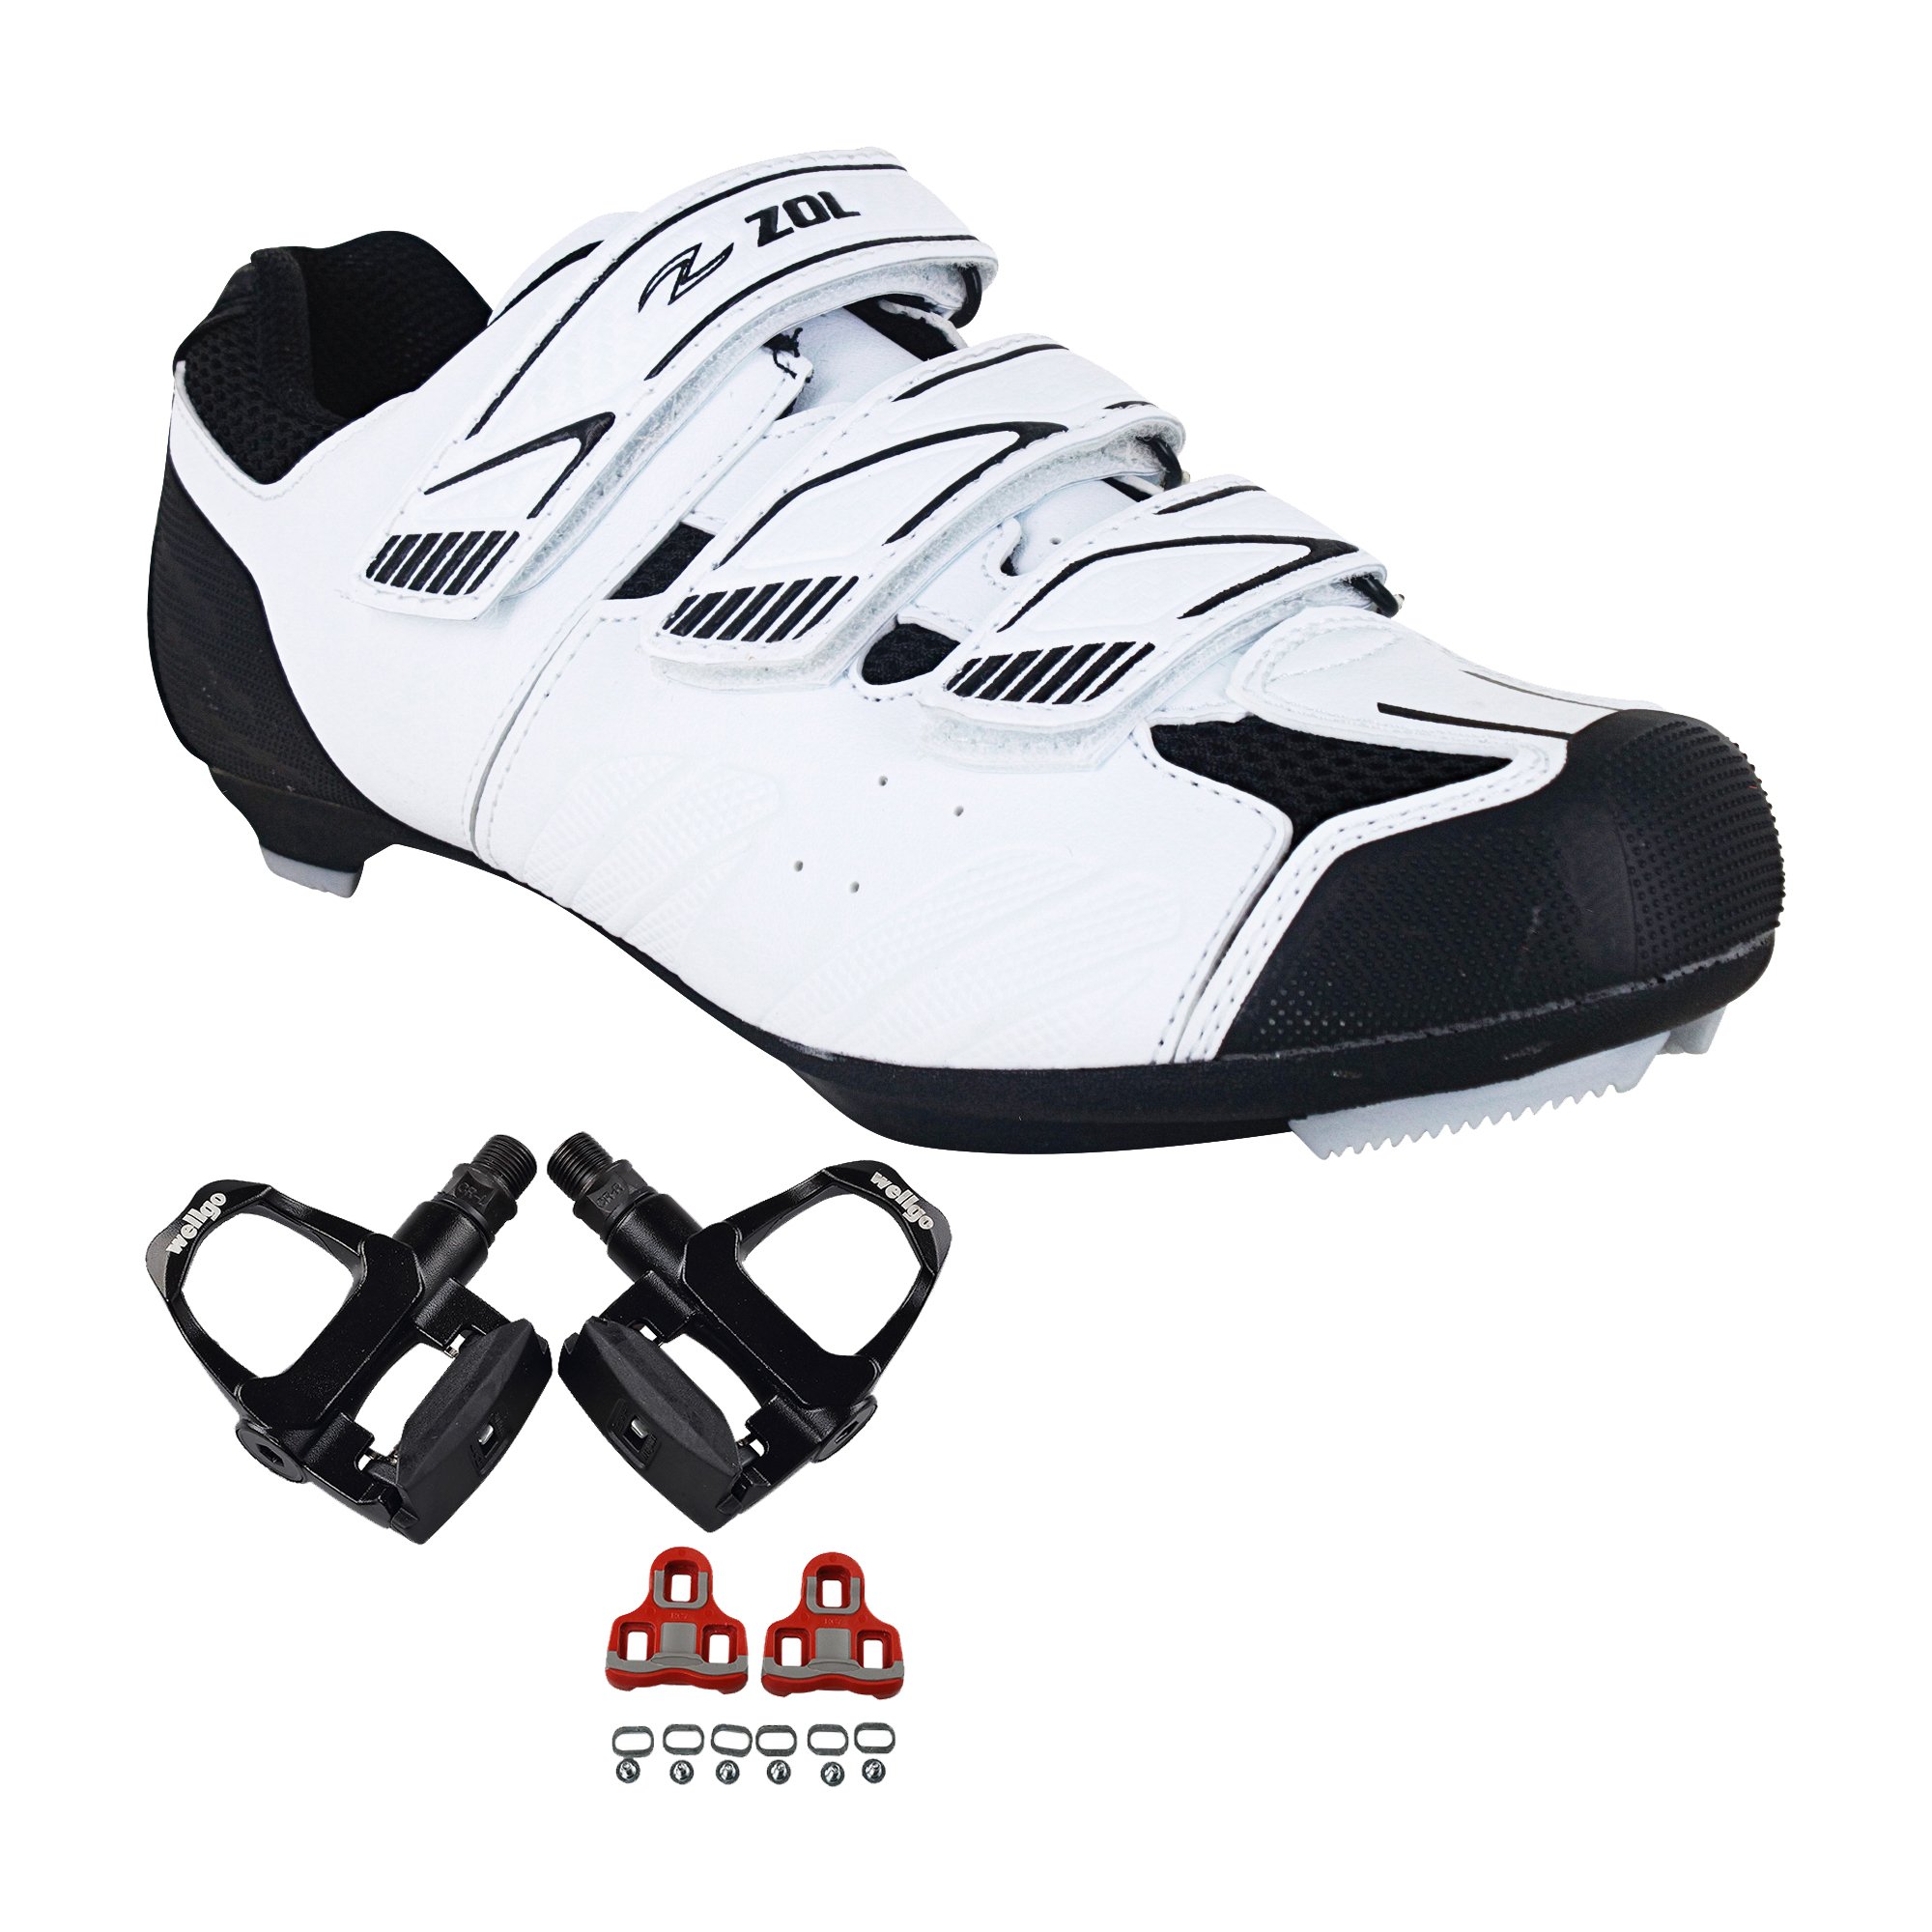 // 8.5 41 cm ZOL Stage Road Cycling Shoes with Pedals and Cleats US EU , New with Box